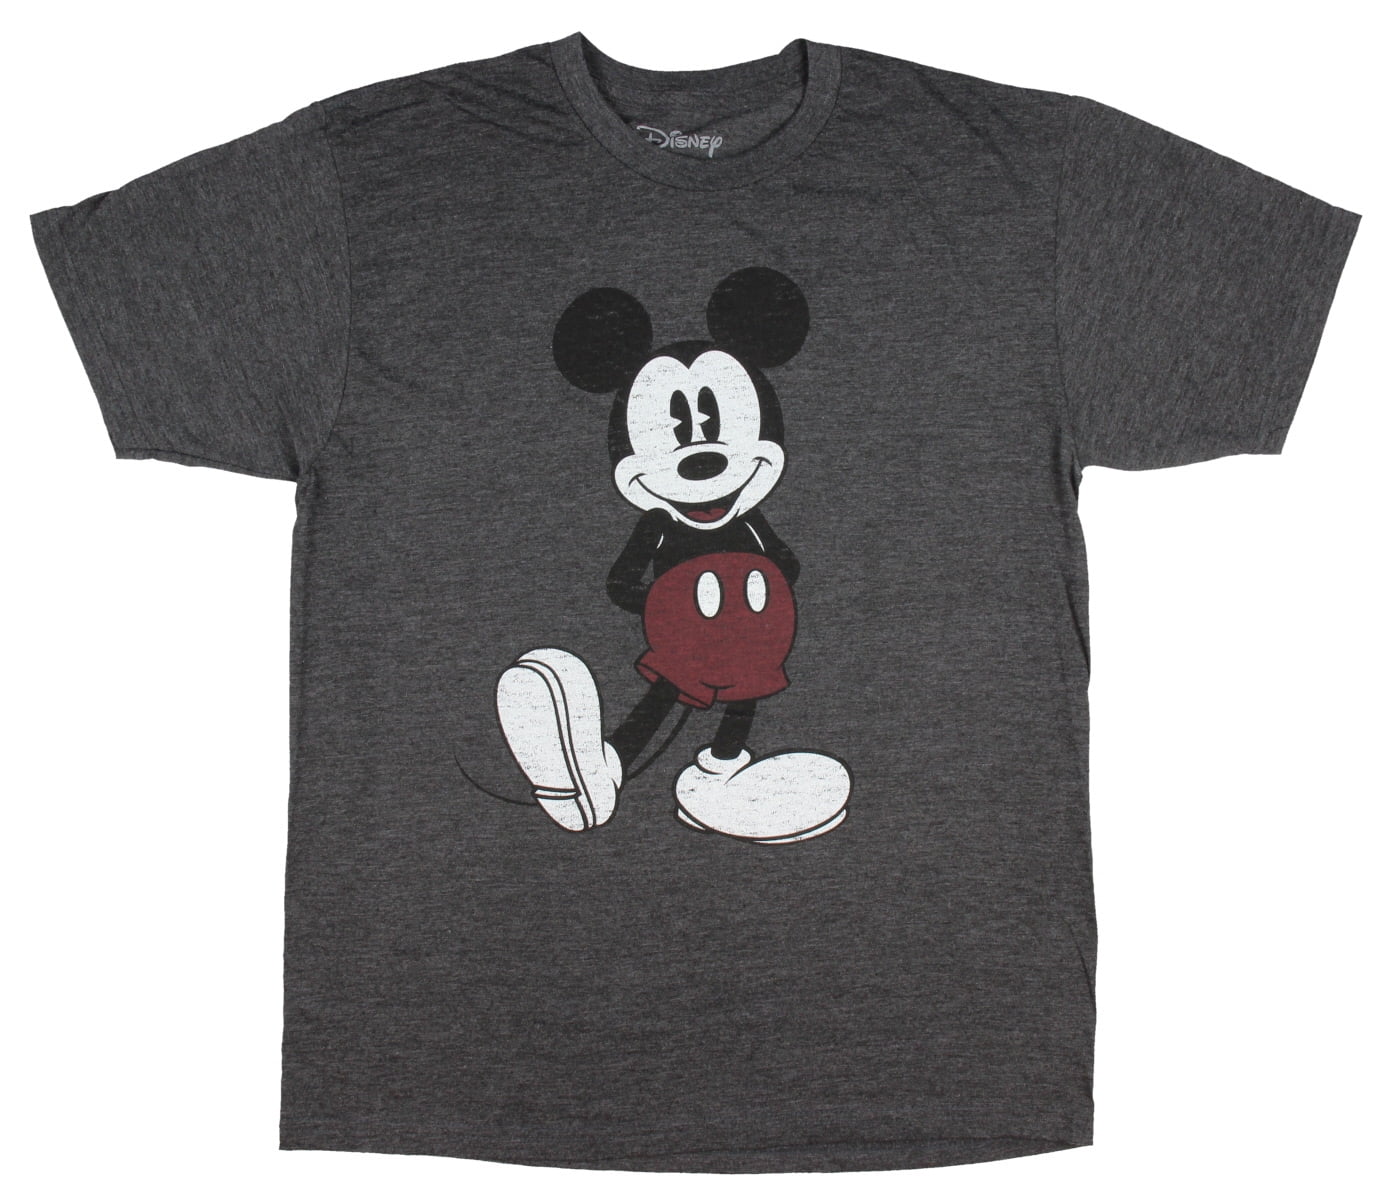 Disney Mickey Mouse Full Pose Distressed Charcoal Heather Men's T-Shirt New